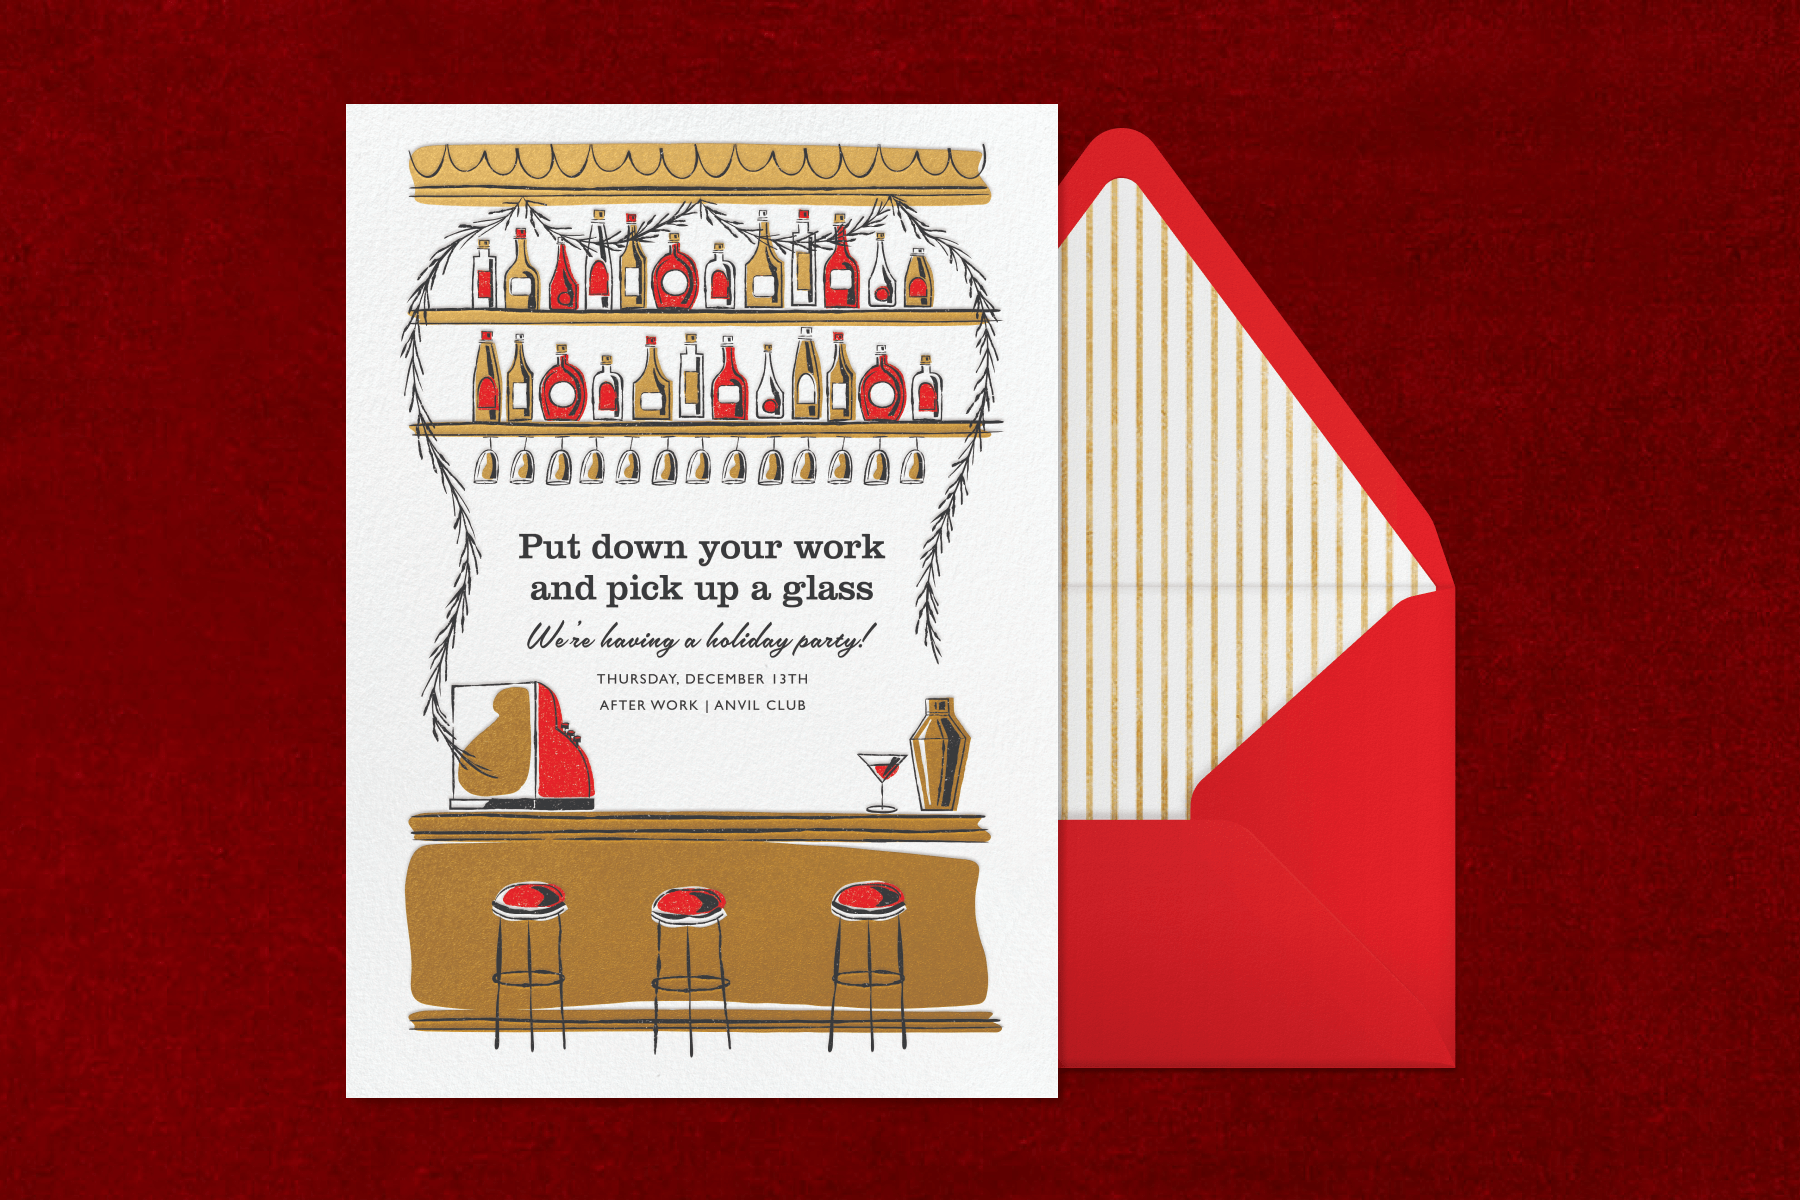 An invitation with a gold and red illustration of a bar with shelves of liquor, three stools, and a draped bough of fir, reads “Put down your work and pick up a glass.”